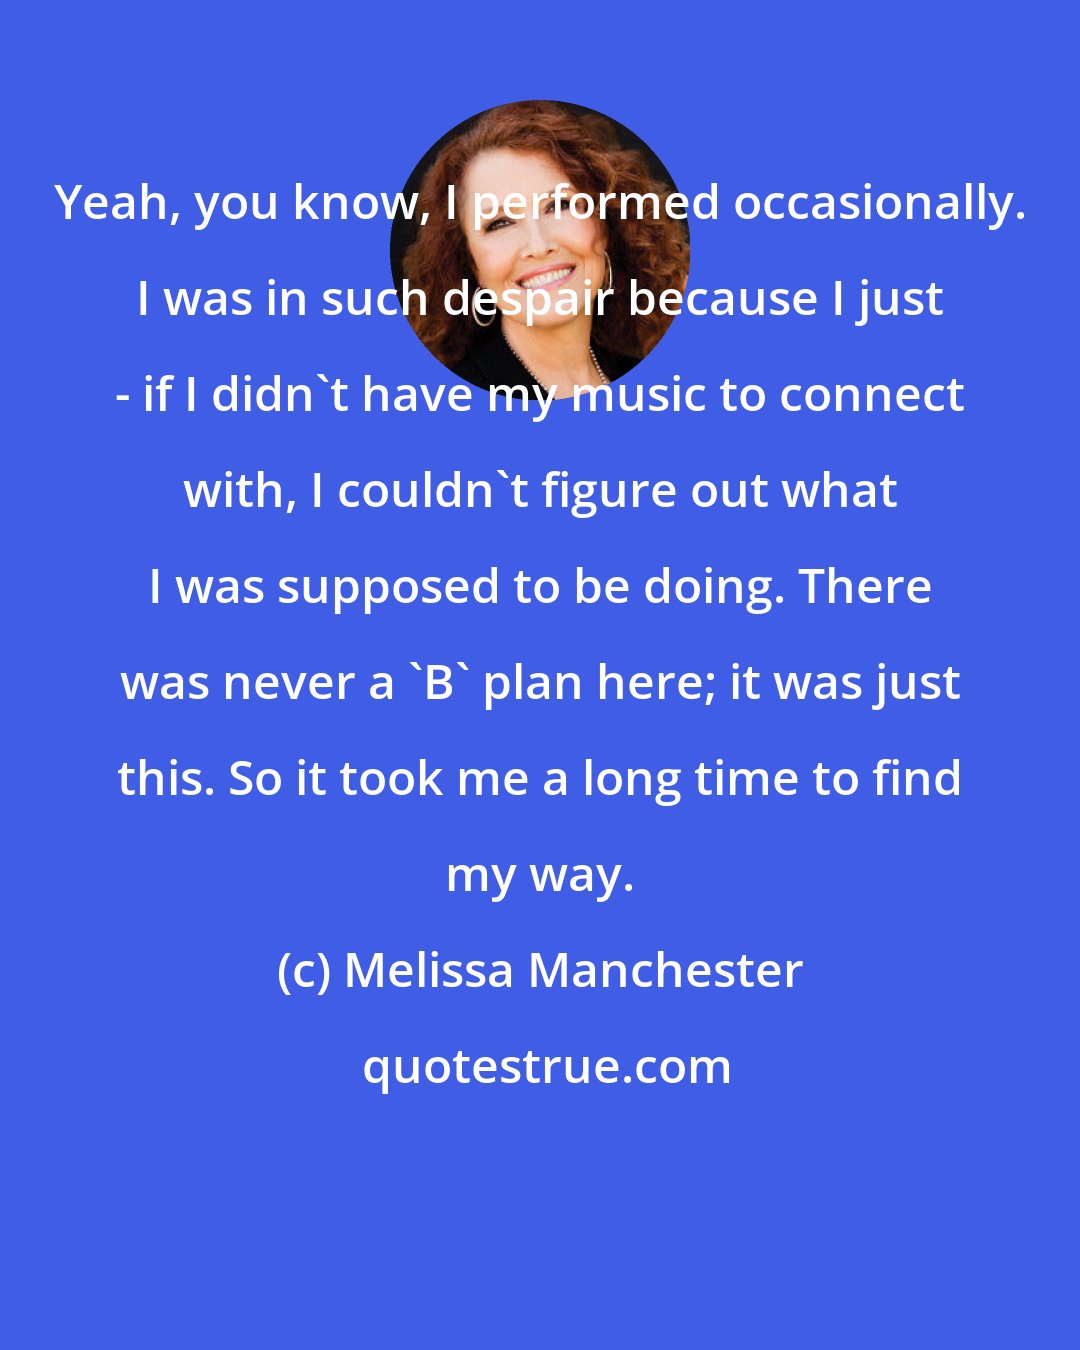 Melissa Manchester: Yeah, you know, I performed occasionally. I was in such despair because I just - if I didn't have my music to connect with, I couldn't figure out what I was supposed to be doing. There was never a 'B' plan here; it was just this. So it took me a long time to find my way.